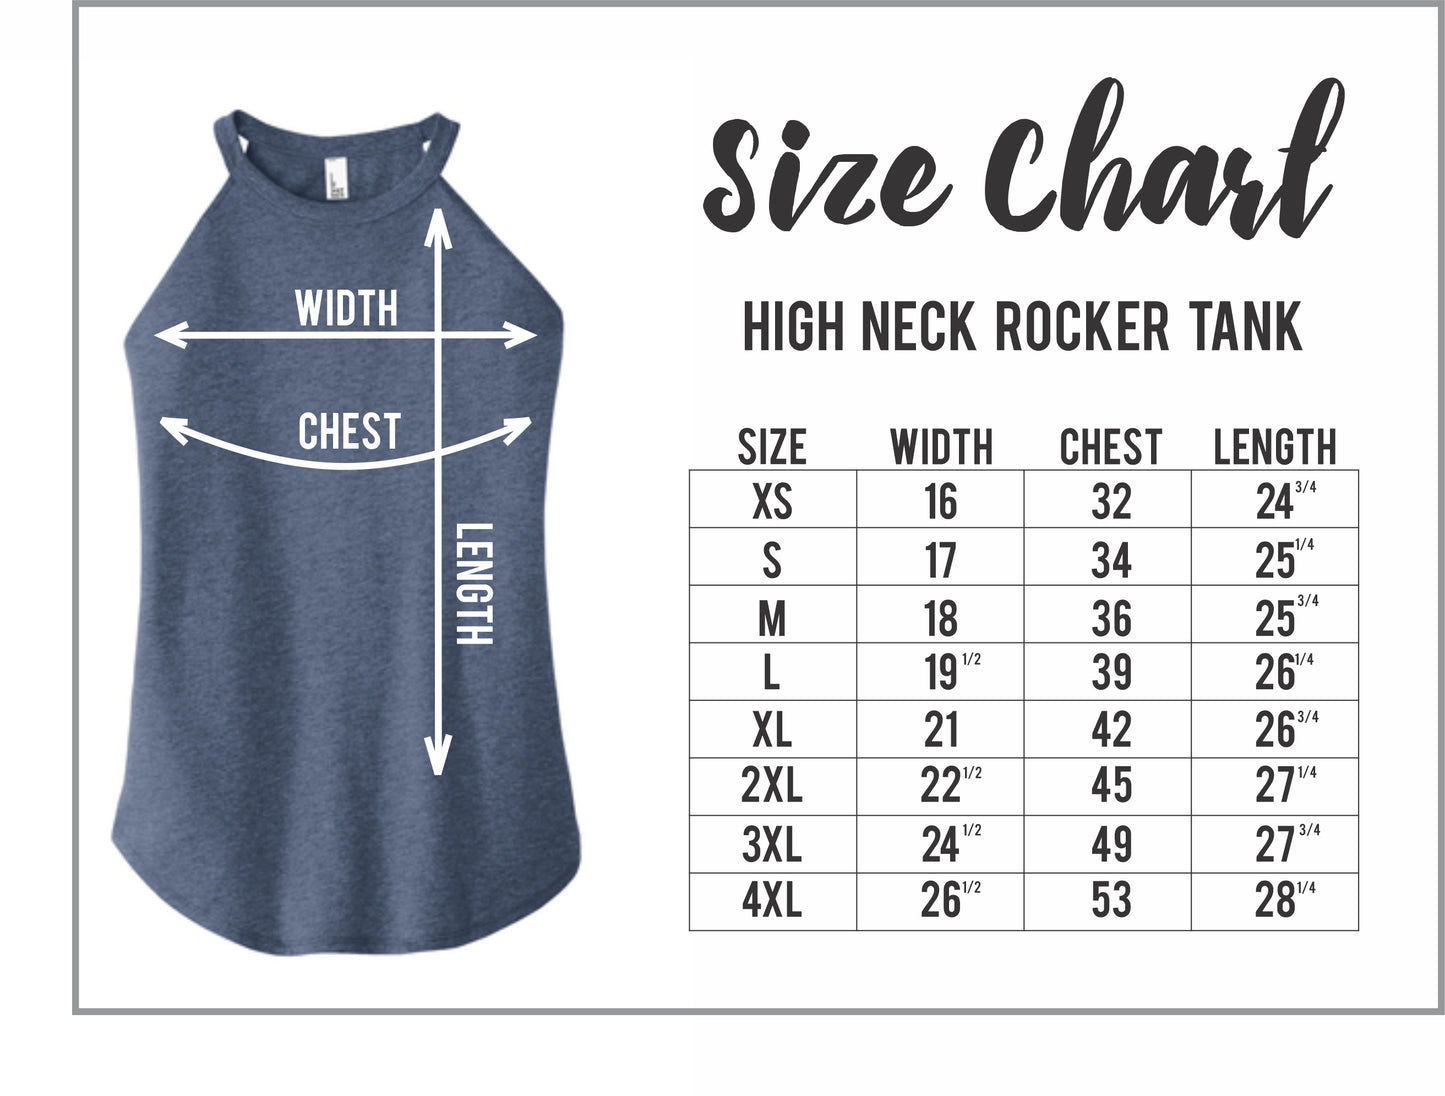 Thick Thighs and Spooky Vibes - High Neck Rocker Tank